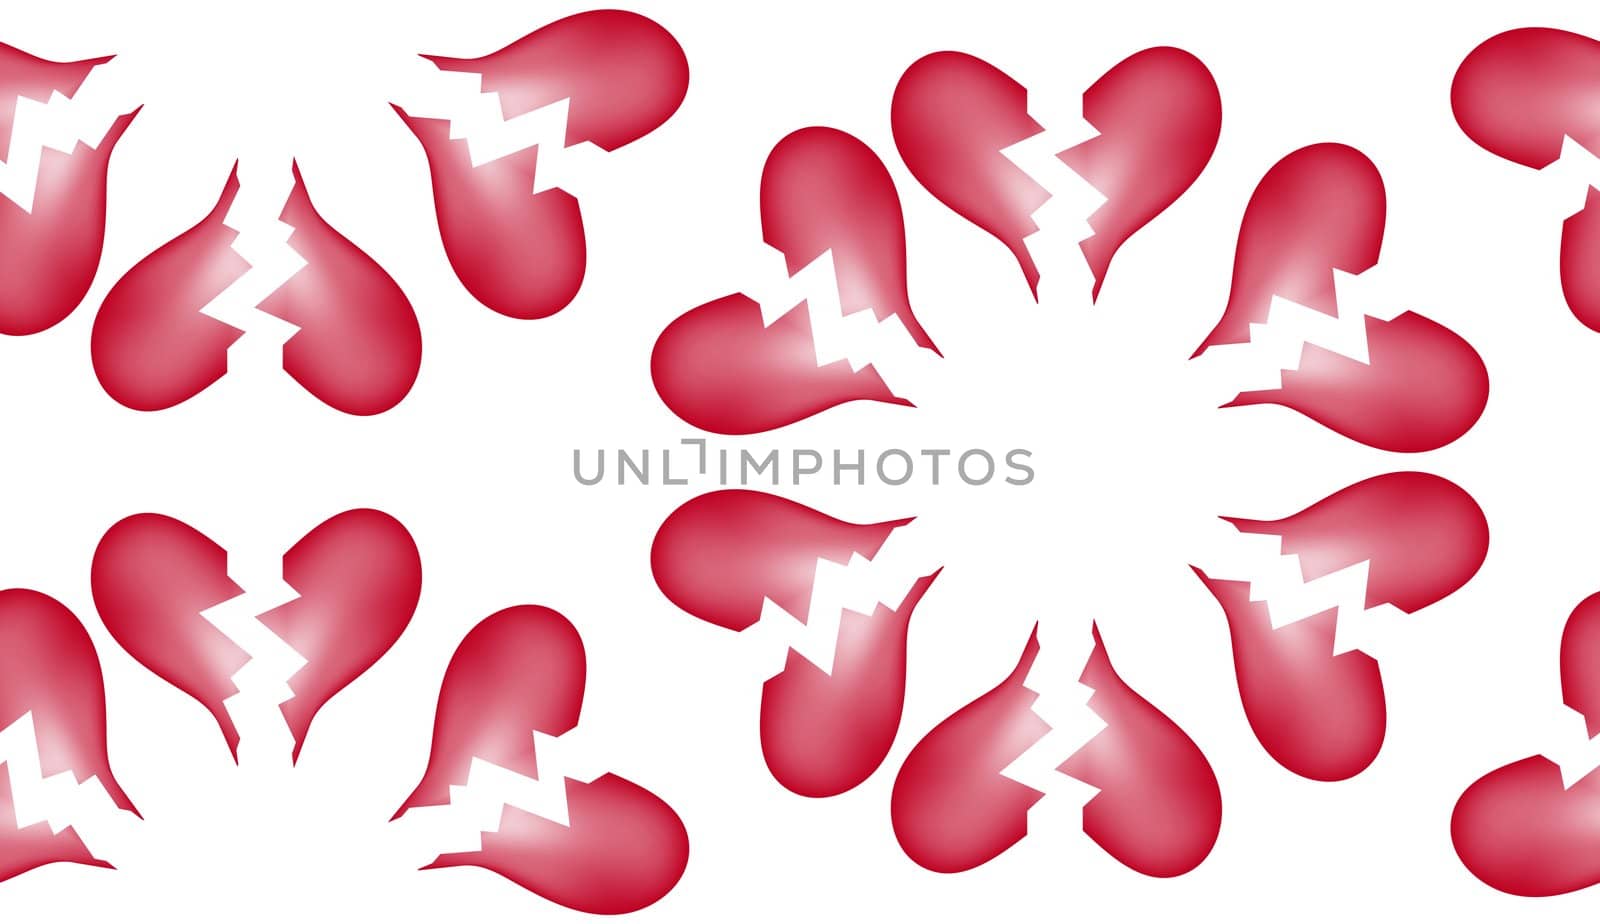 A seamless tile pattern background made out of broken hearts.